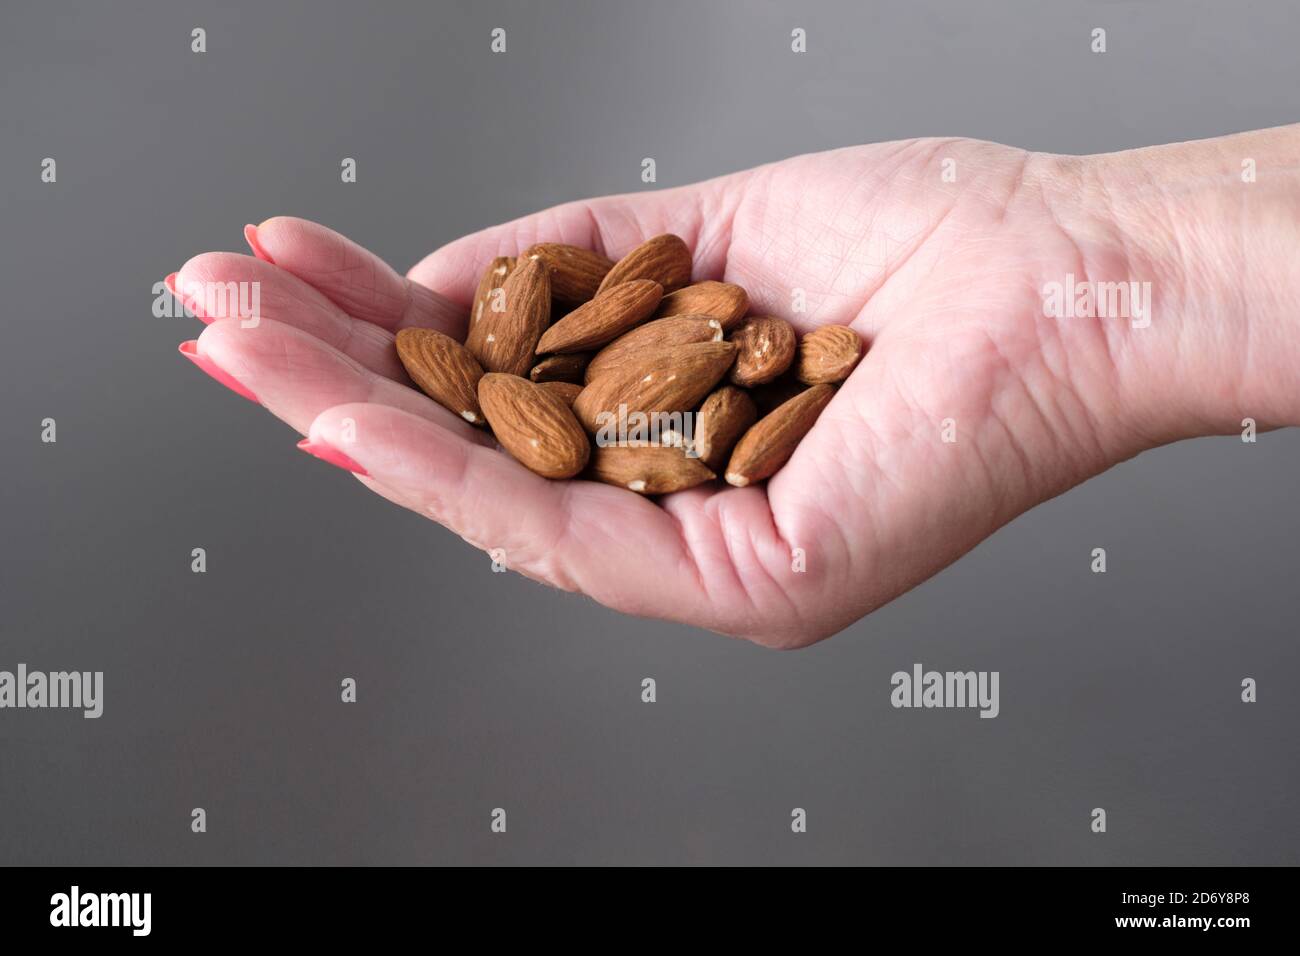 A handful of almond nuts, one ounce or 28g. Highly nutritious and rich in healthy fats, antioxidants, vitamins and minerals. A healthy daily snack Stock Photo